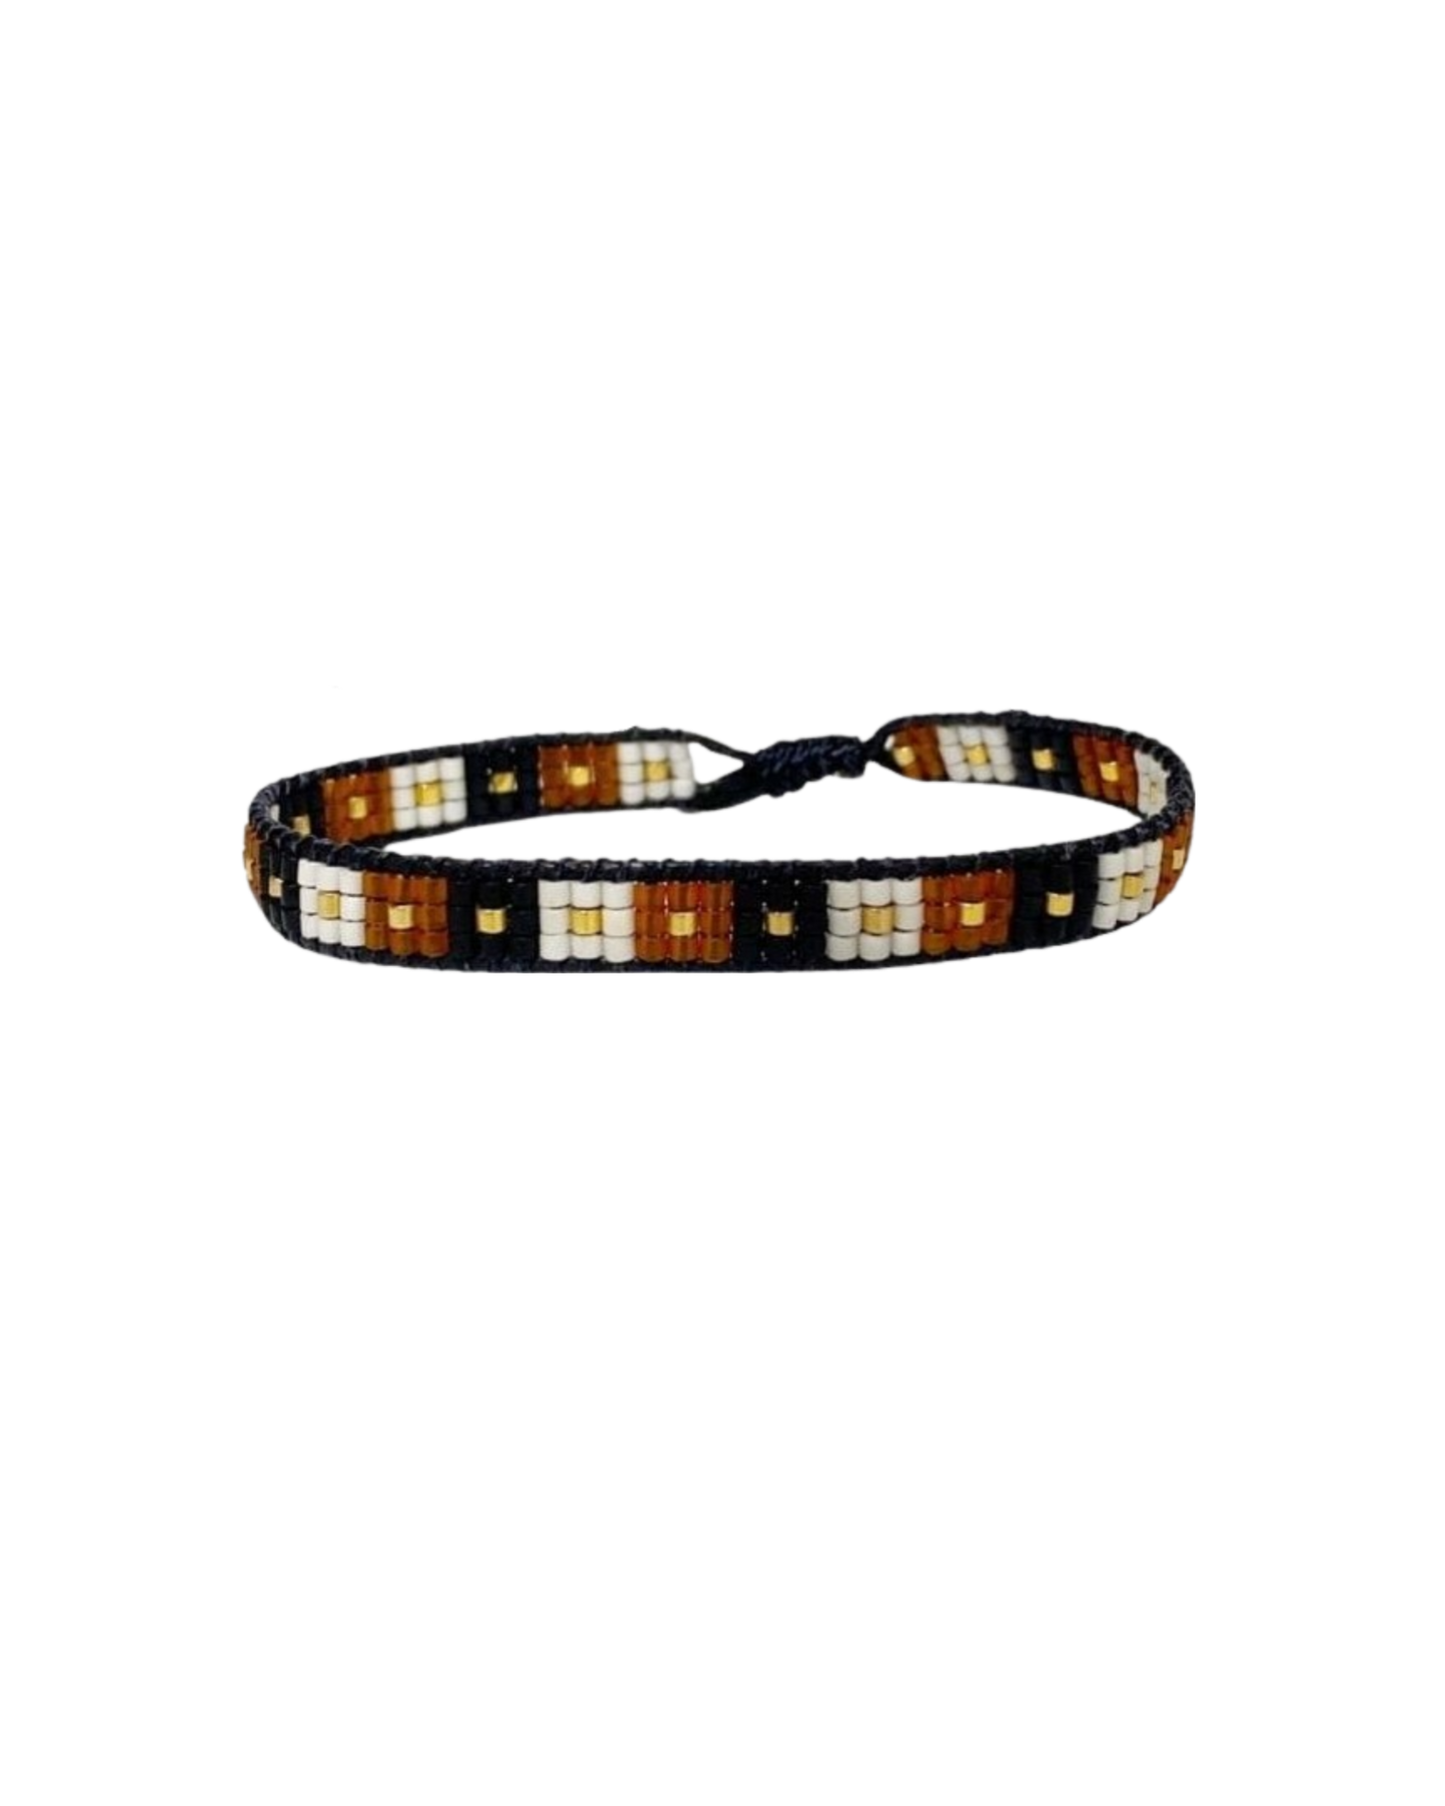 beaded-bracelet with checkered design in black and brown colors